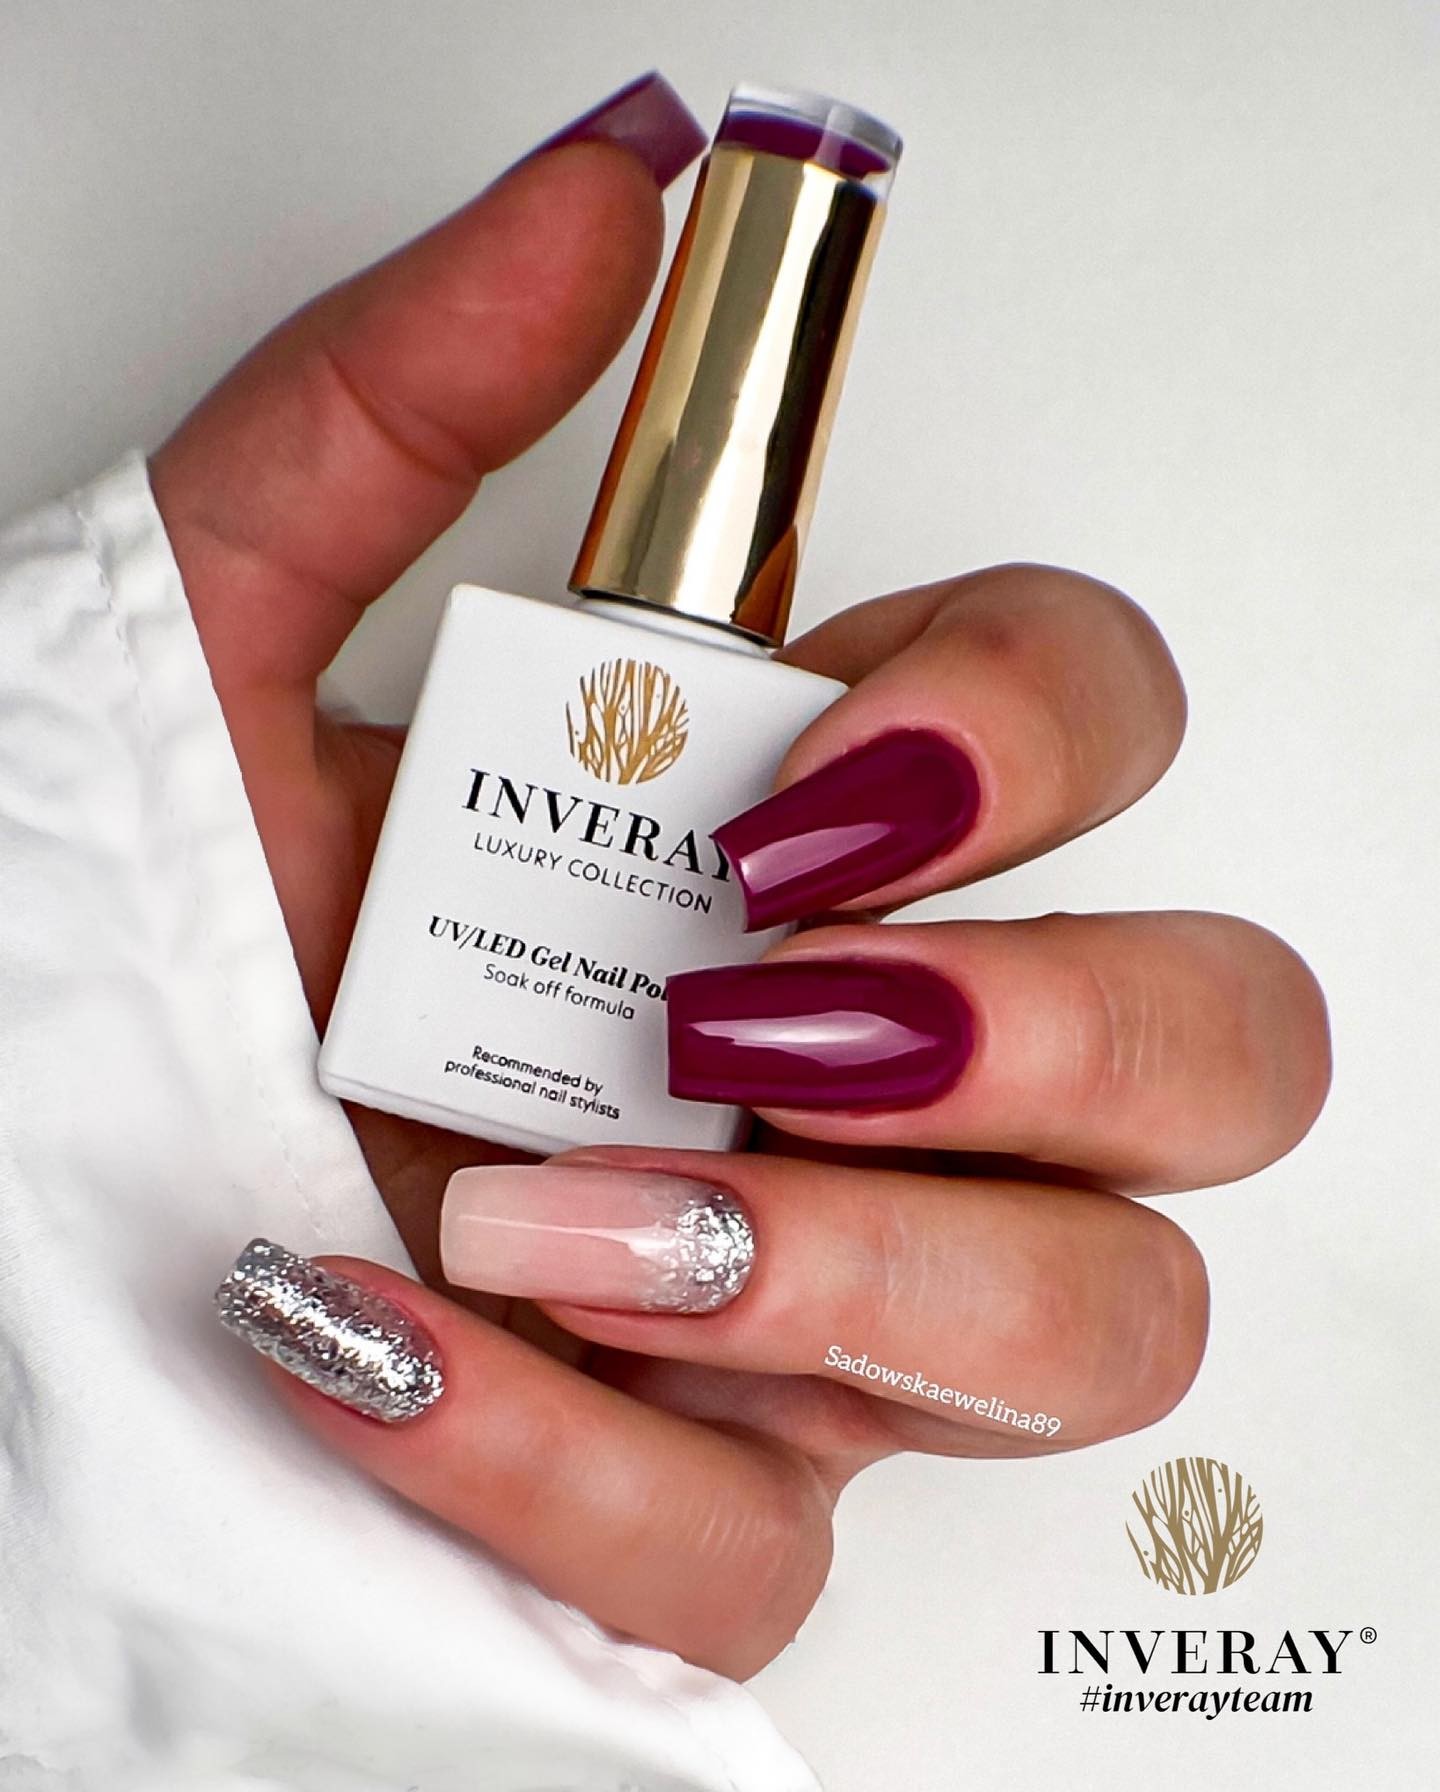 Long Square Burgundy Nails with Silver Polish Design